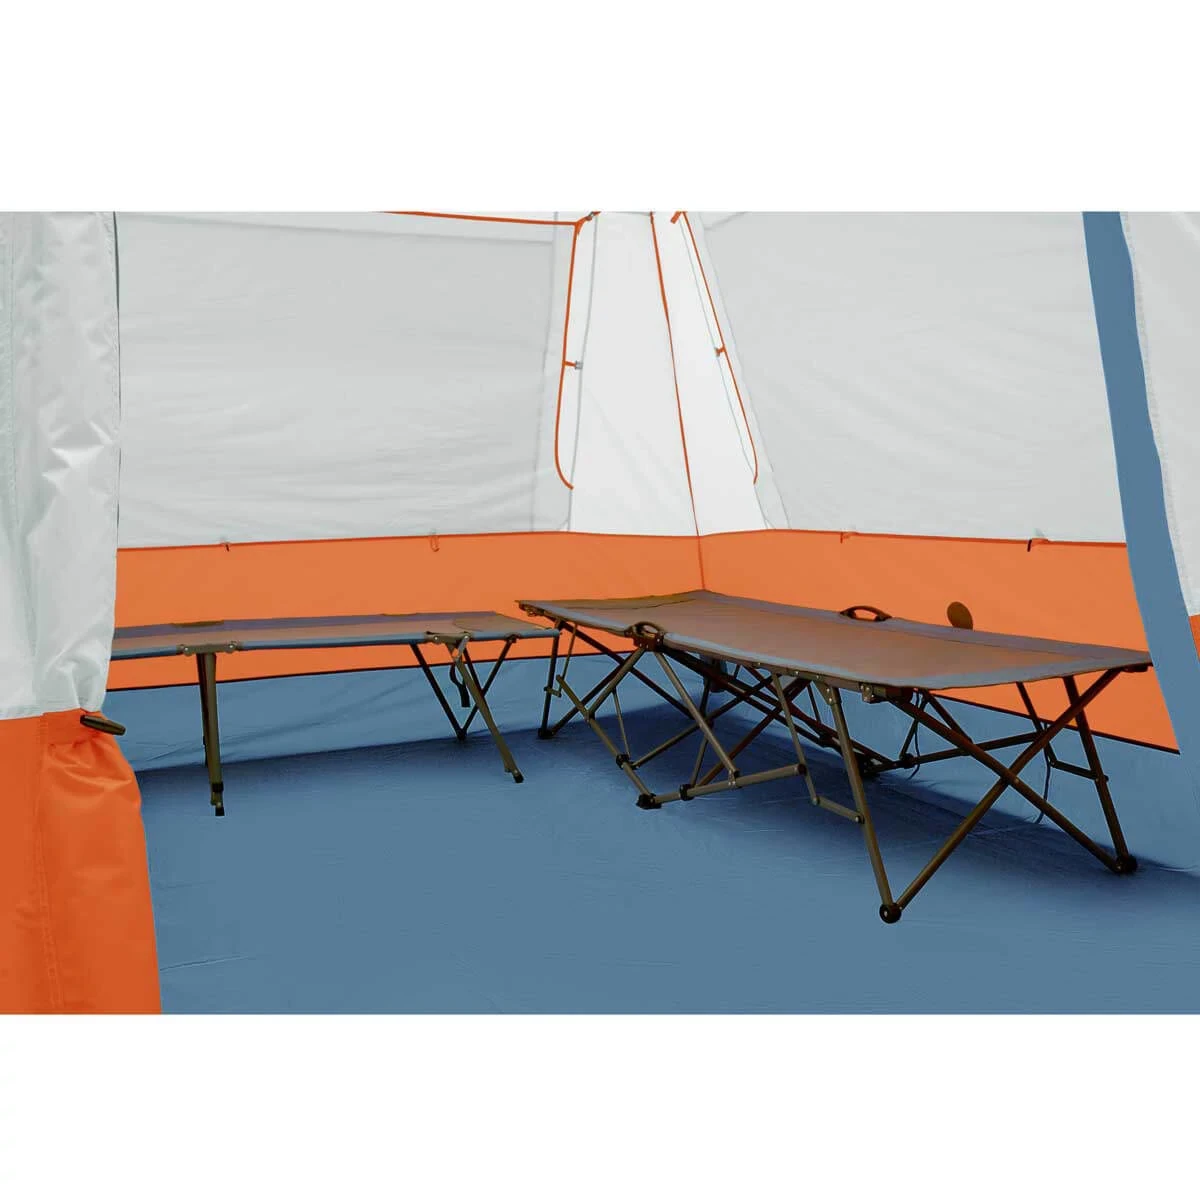 Cots shown in a Copper Canyon LX tent